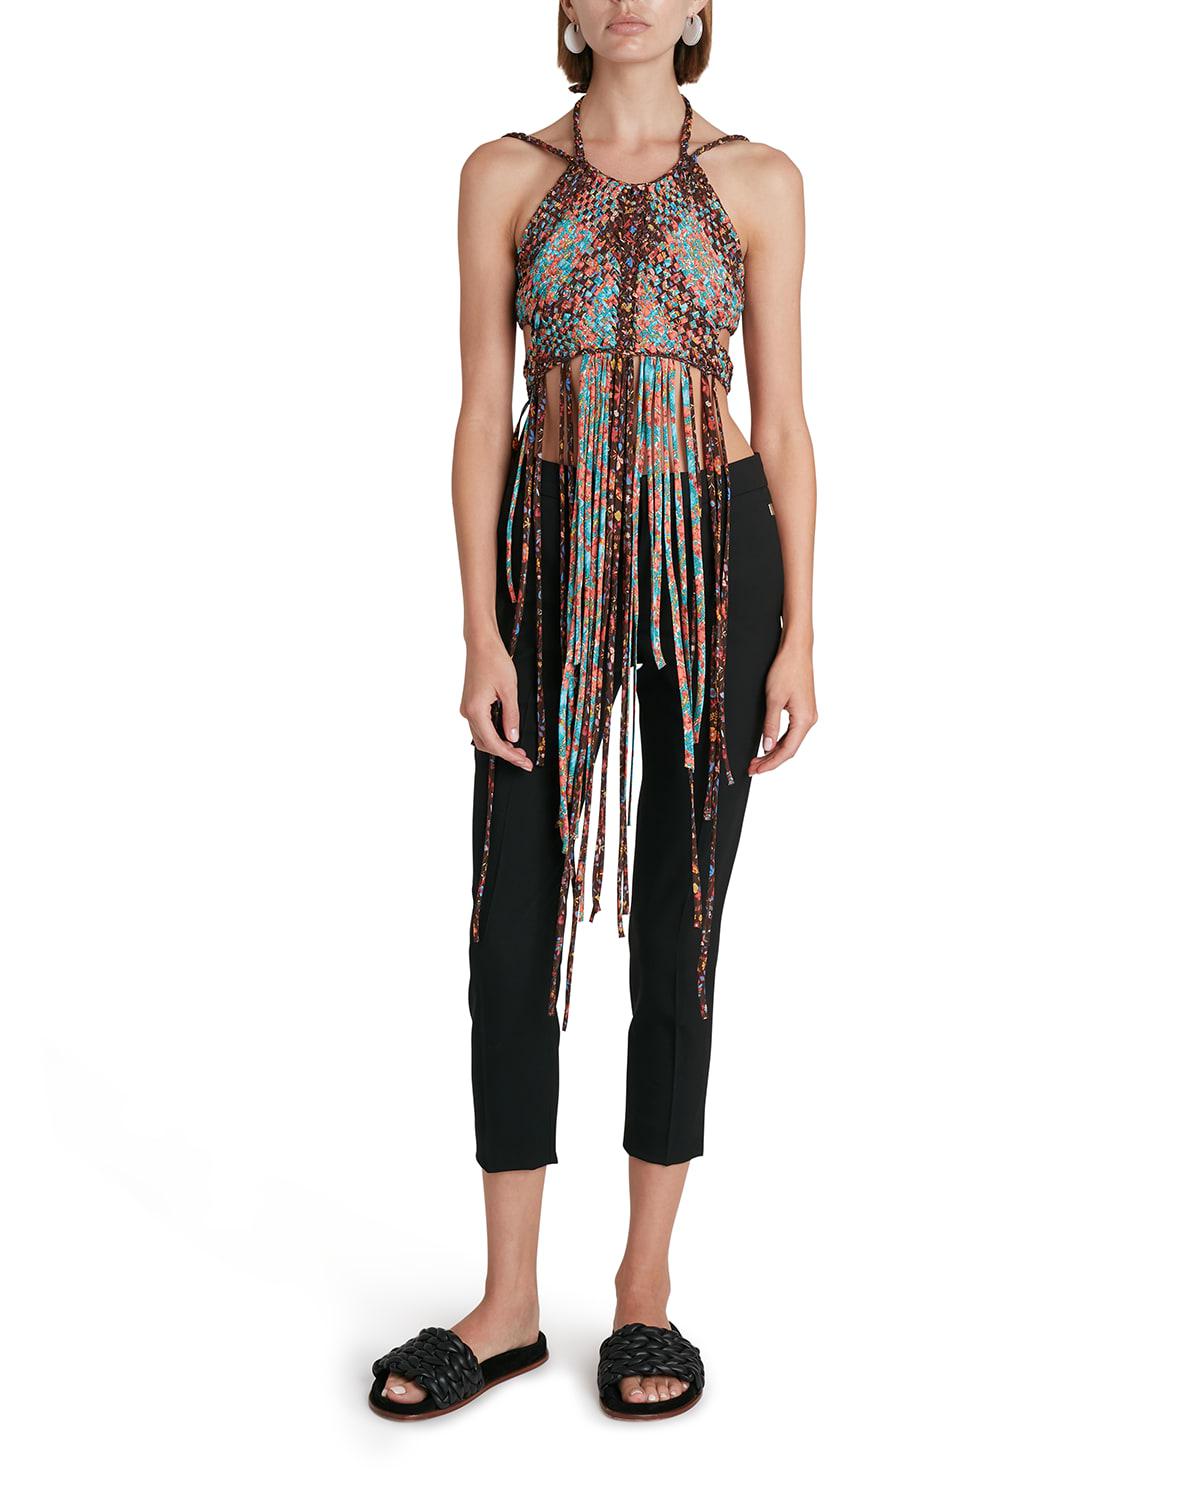 Hand Woven Strappy Crop Top w/ Fringe by CHLOE